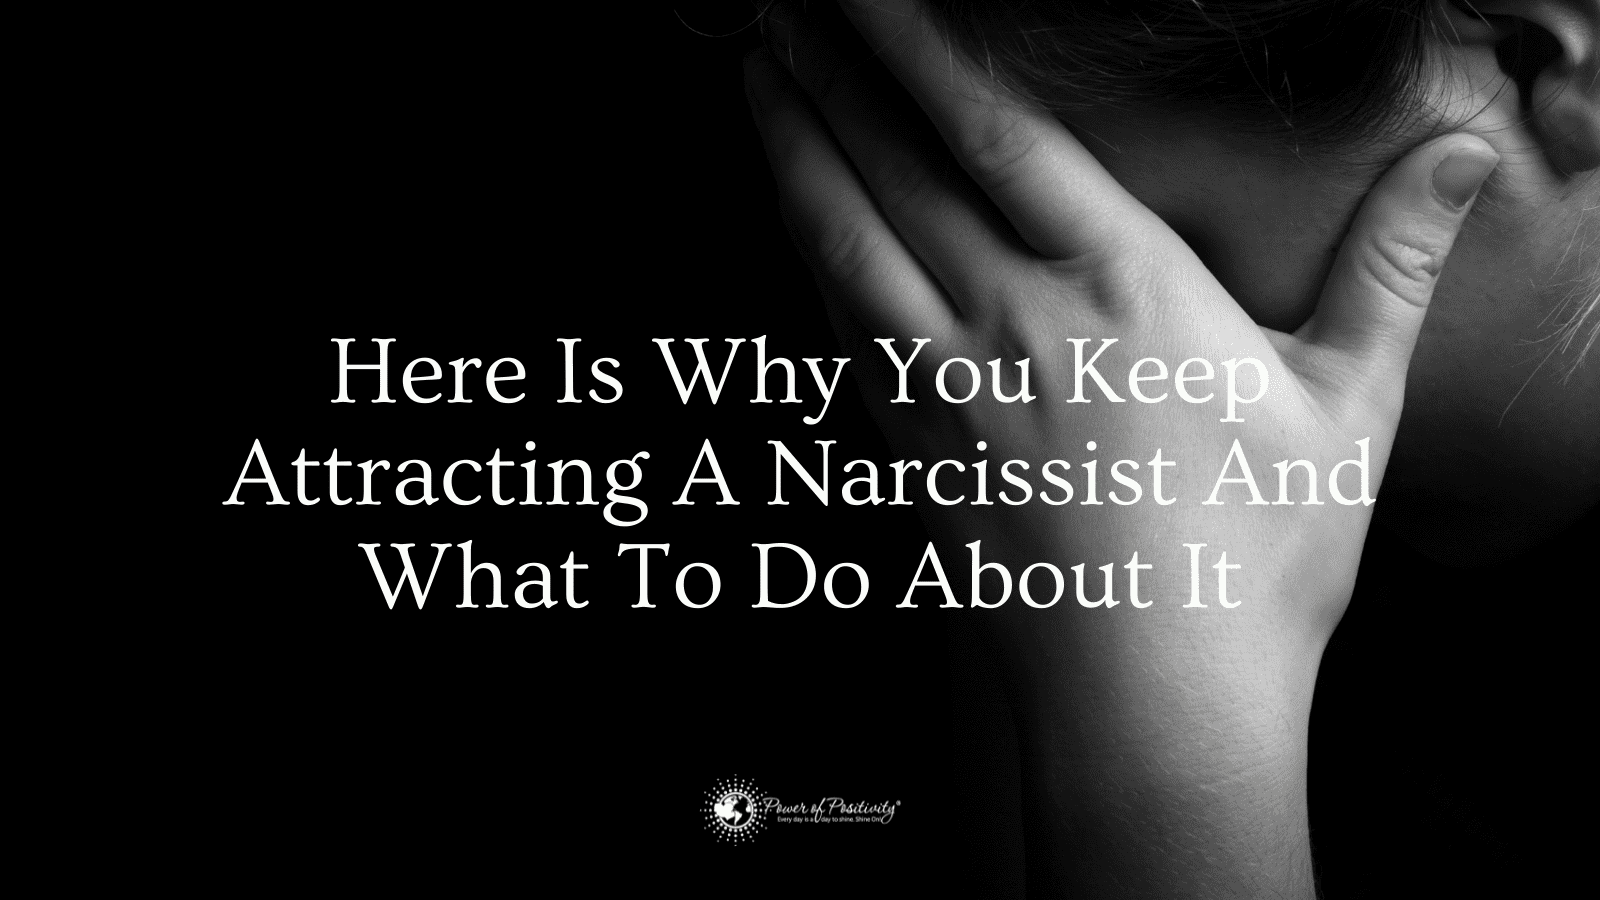 Here Is Why You Keep Attracting A Narcissist And What To Do About It